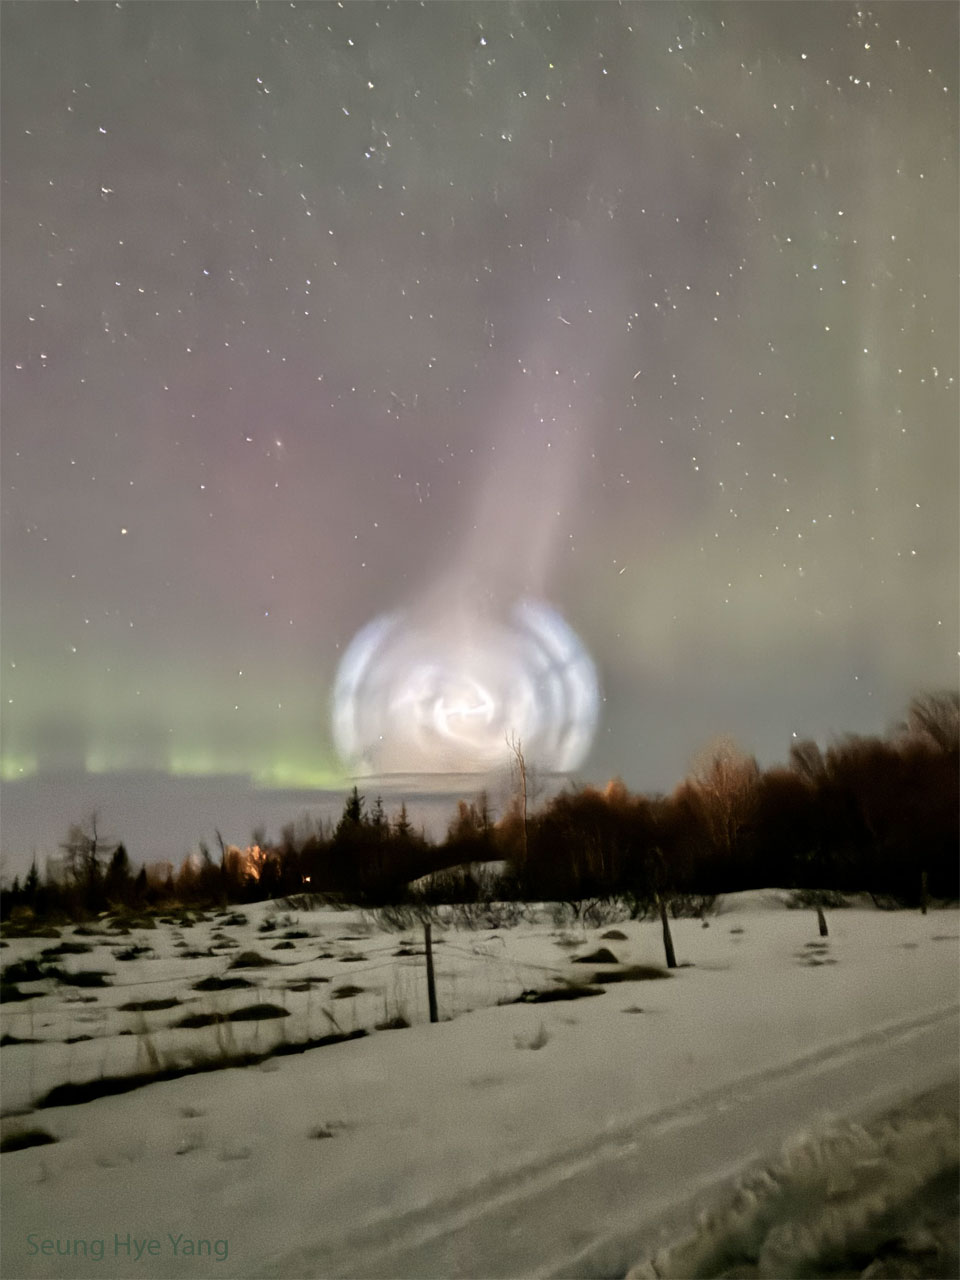 A field of snow is shown, lined with trees along the back.  Above the horizon is an unusual white spiral cloud.   Stars dot the background, and faint green and red aurora  are also visible.   Please see the explanation for more detailed information.